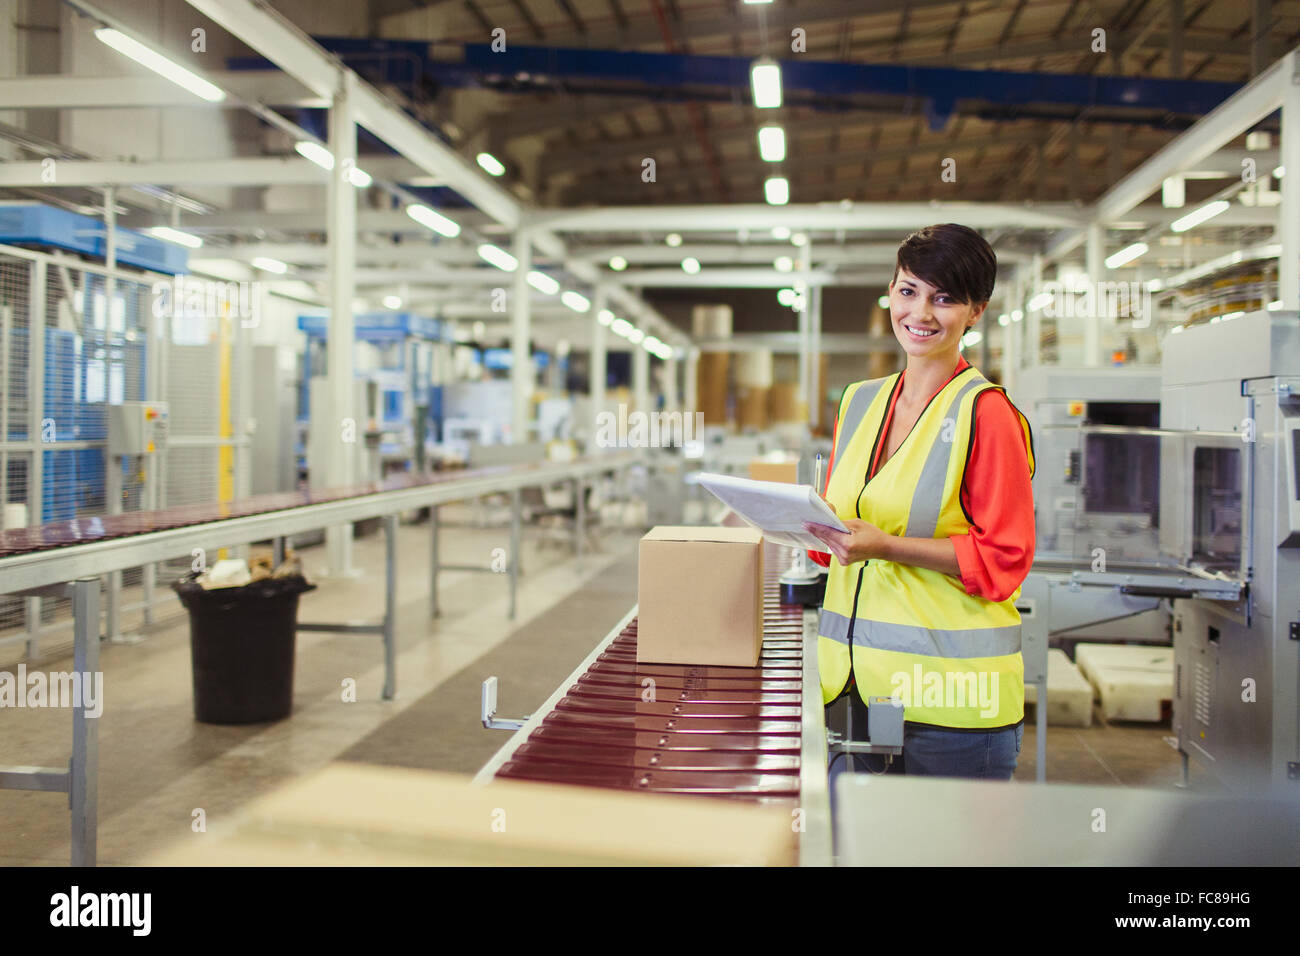 Portrait smiling worker checking cardboard boxes on conveyor belt production line in factory Stock Photo